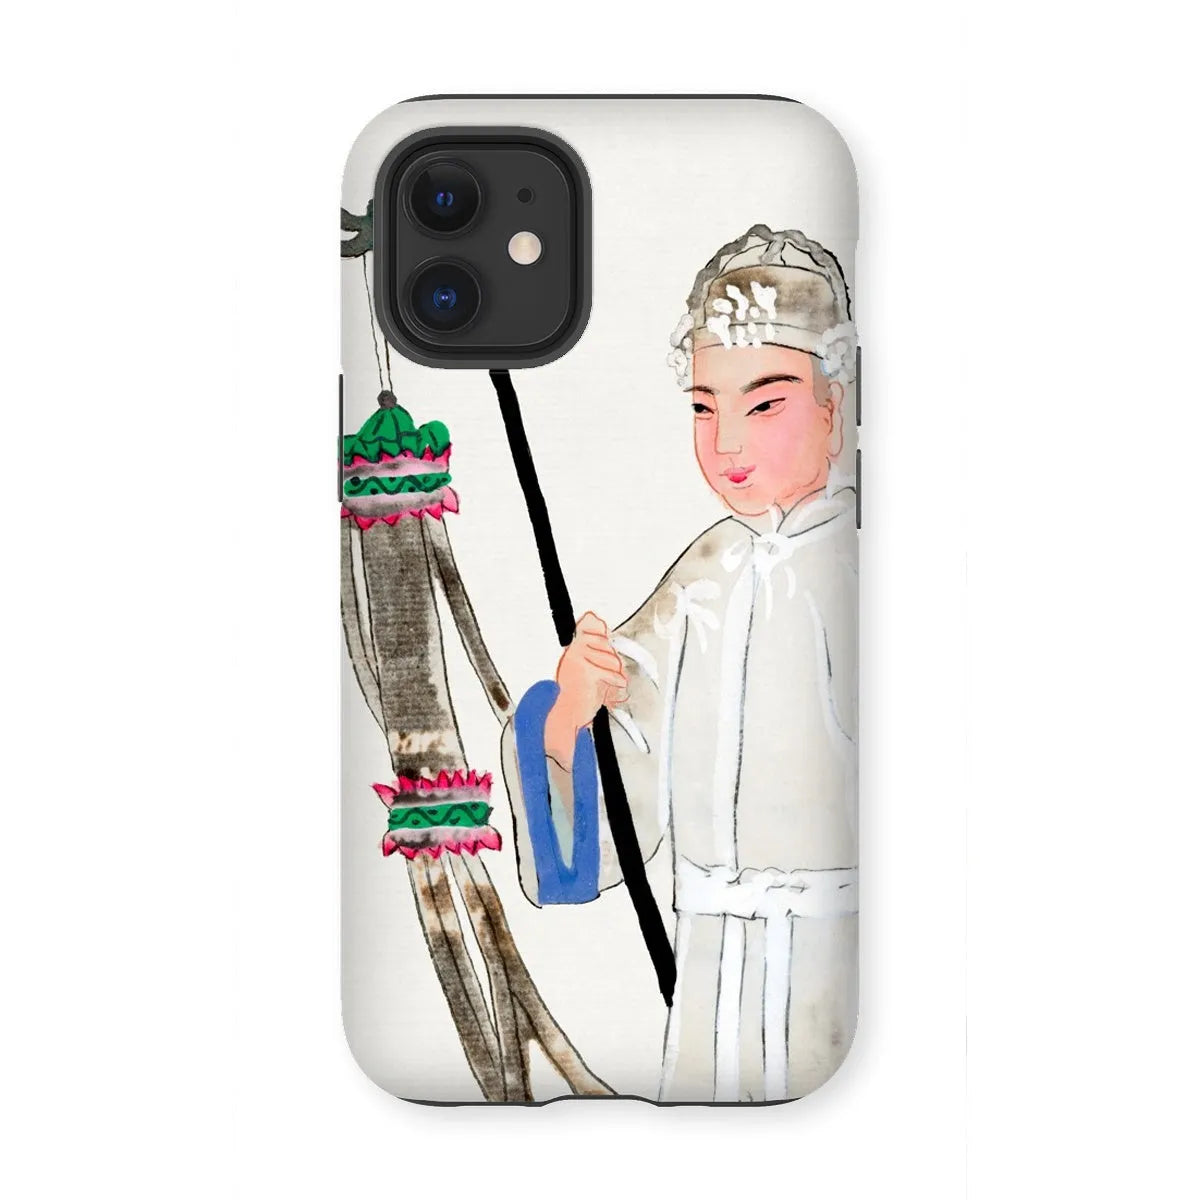 Man In Mourning - Chinese Historical Art Phone Case - Iphone 12 Mini / Matte - Mobile Phone Cases - Aesthetic Art